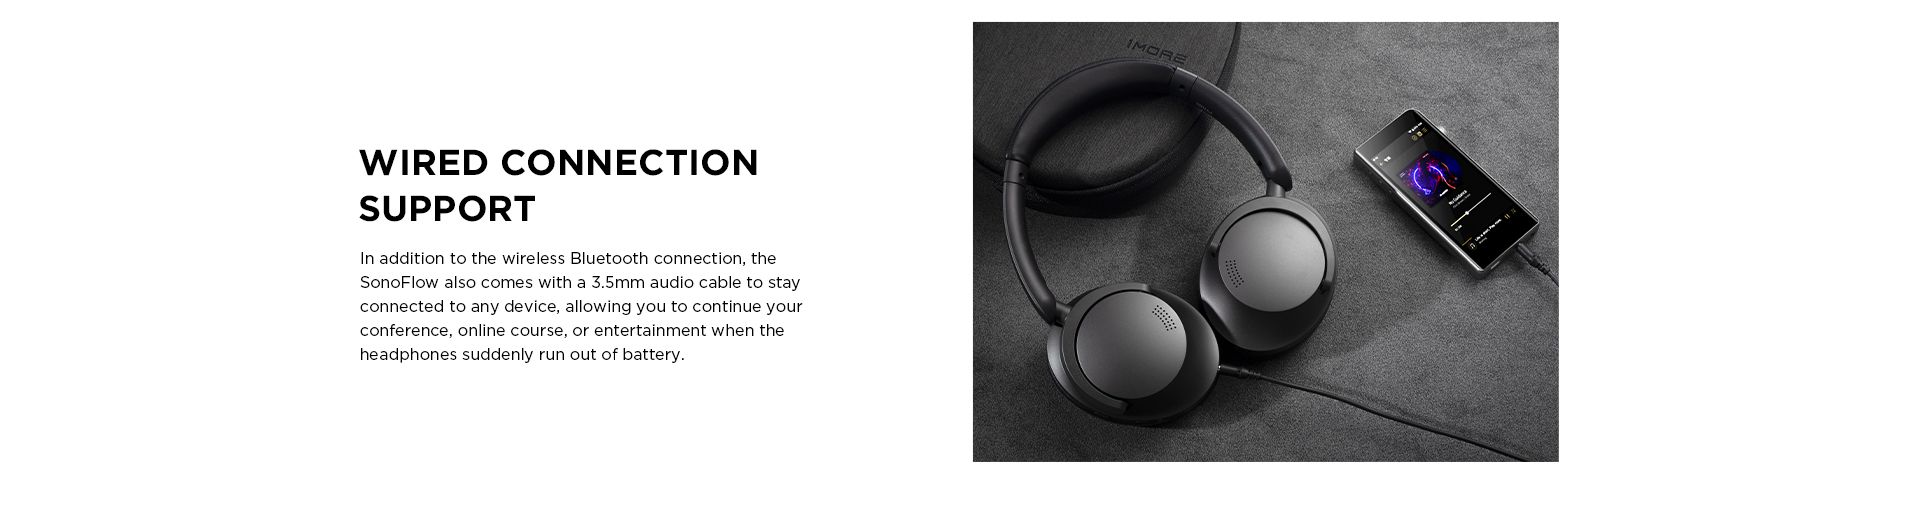 1MORE-SonoFlow-Active-Noise-Cancelling-Headphones-Bluetooth-Headphones-with-LDAC-for-Hi-Res-Wireless-Audio-70H-Playtime-Clear-Calls-Preset-EQ-42